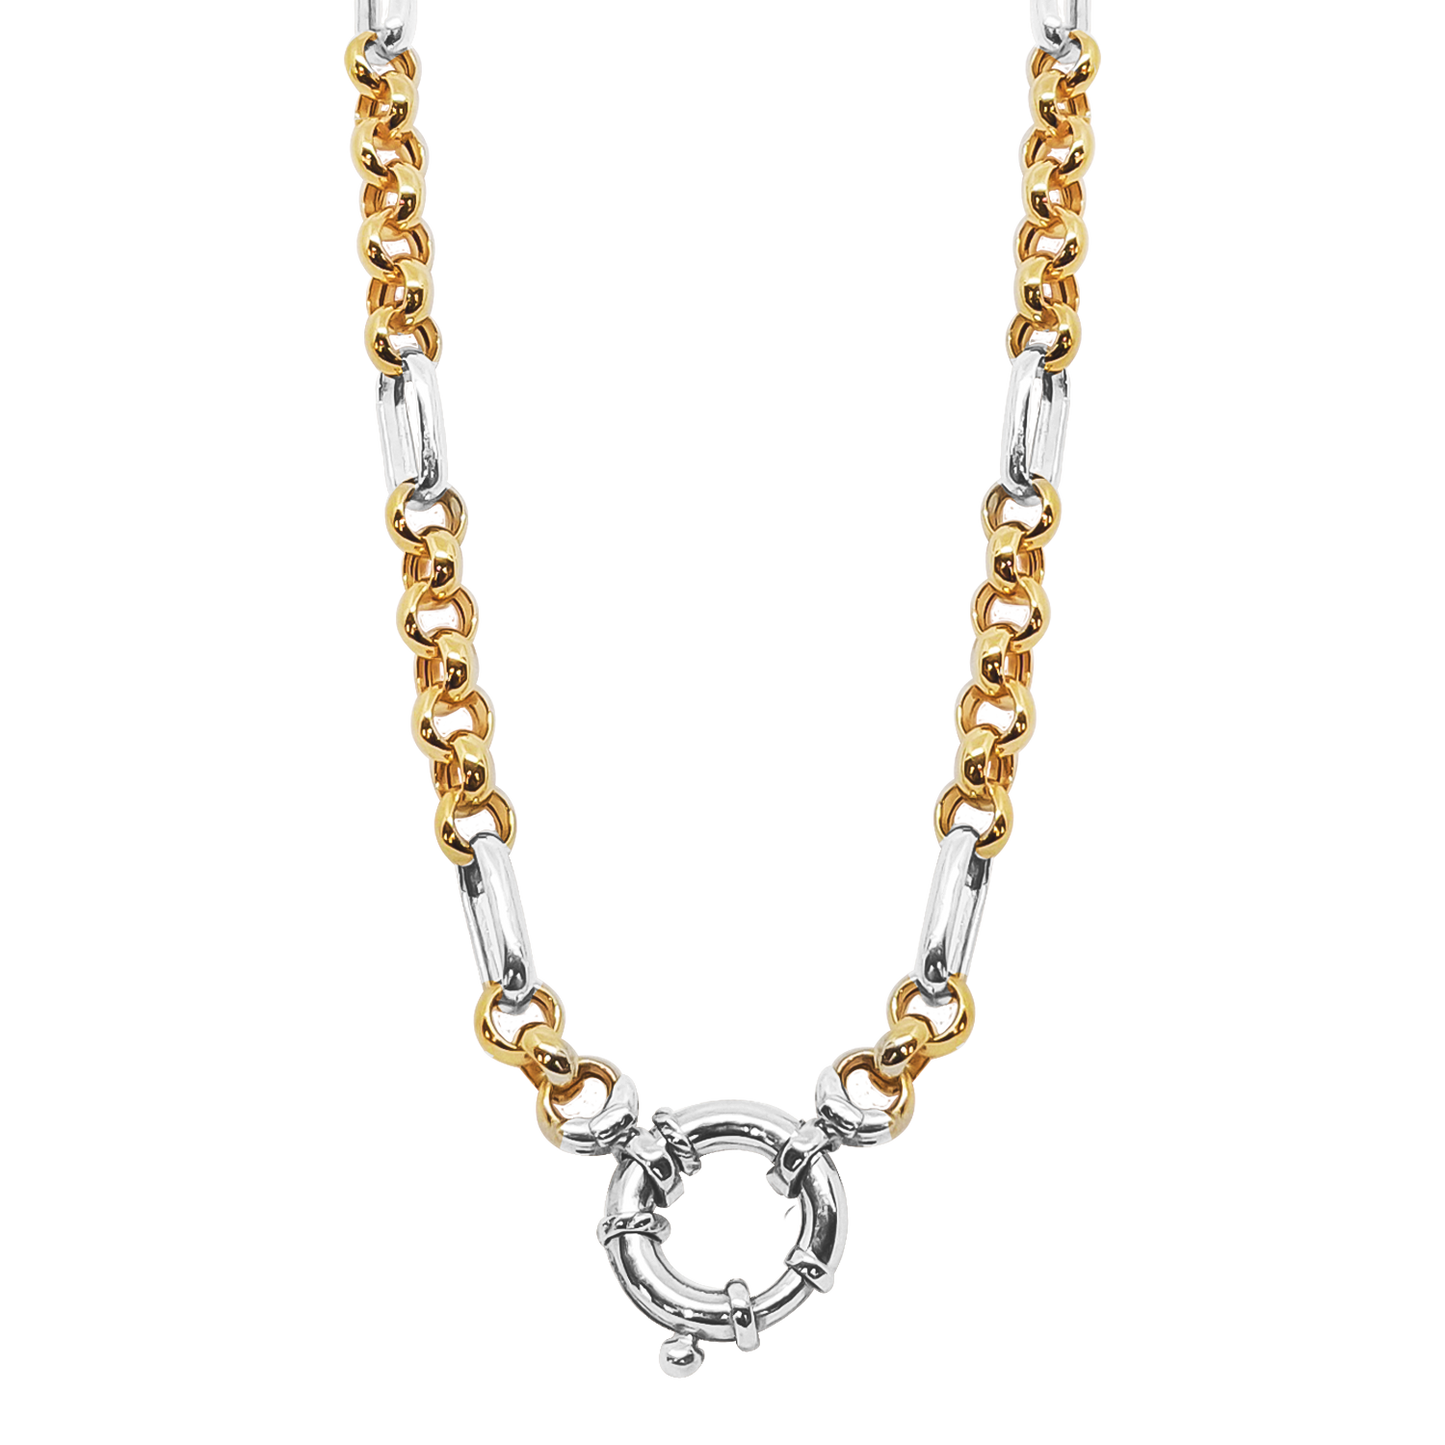 45cm Round and Oval Link Chain in 9ct Two Tone Gold